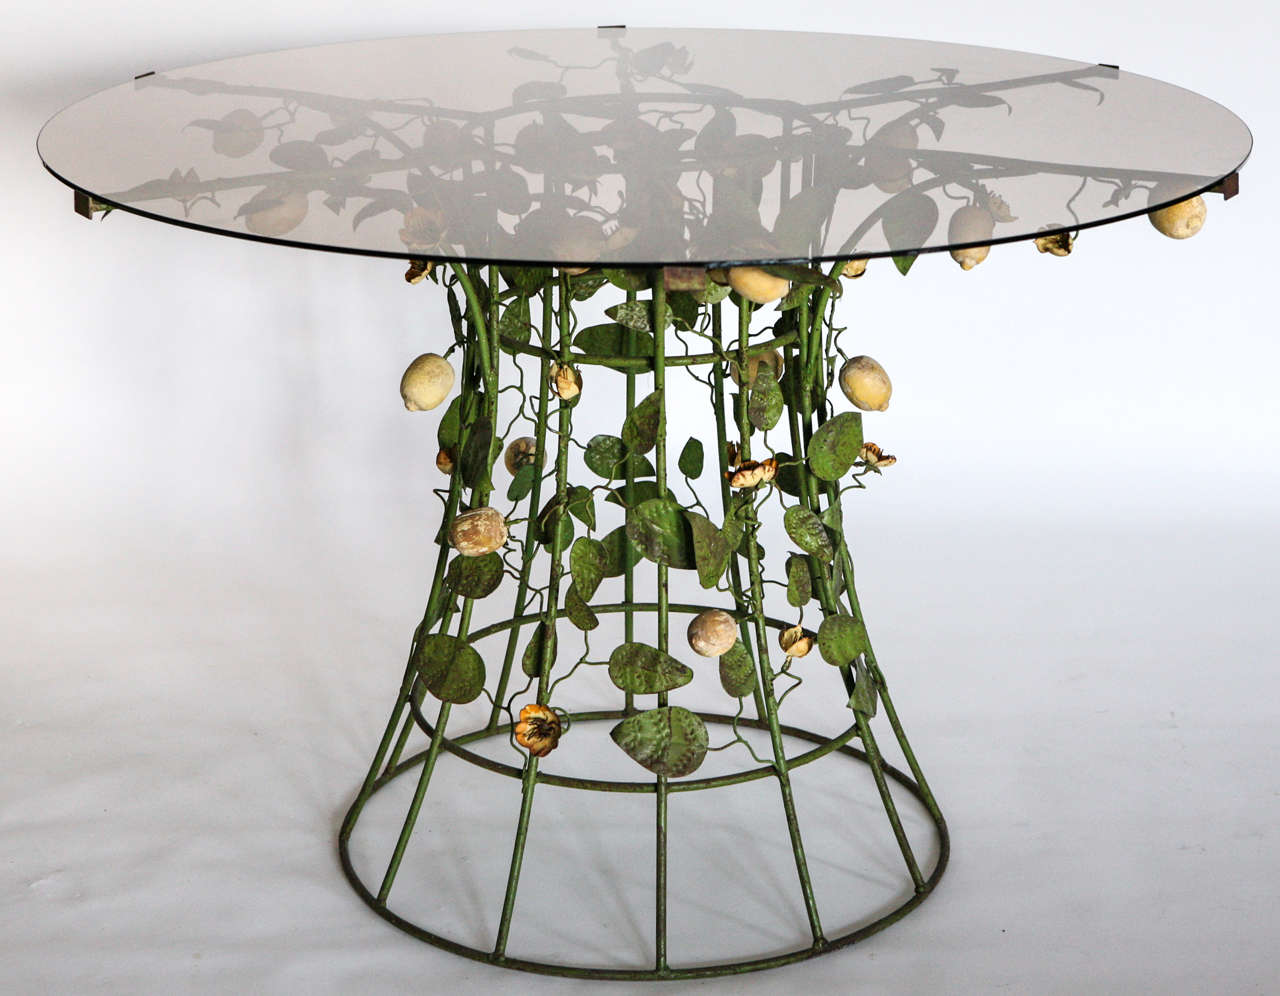 Handmade tole lemon vines, flowers and leaves adorned with carved, painted wood lemons. Replaced smoky glass top.